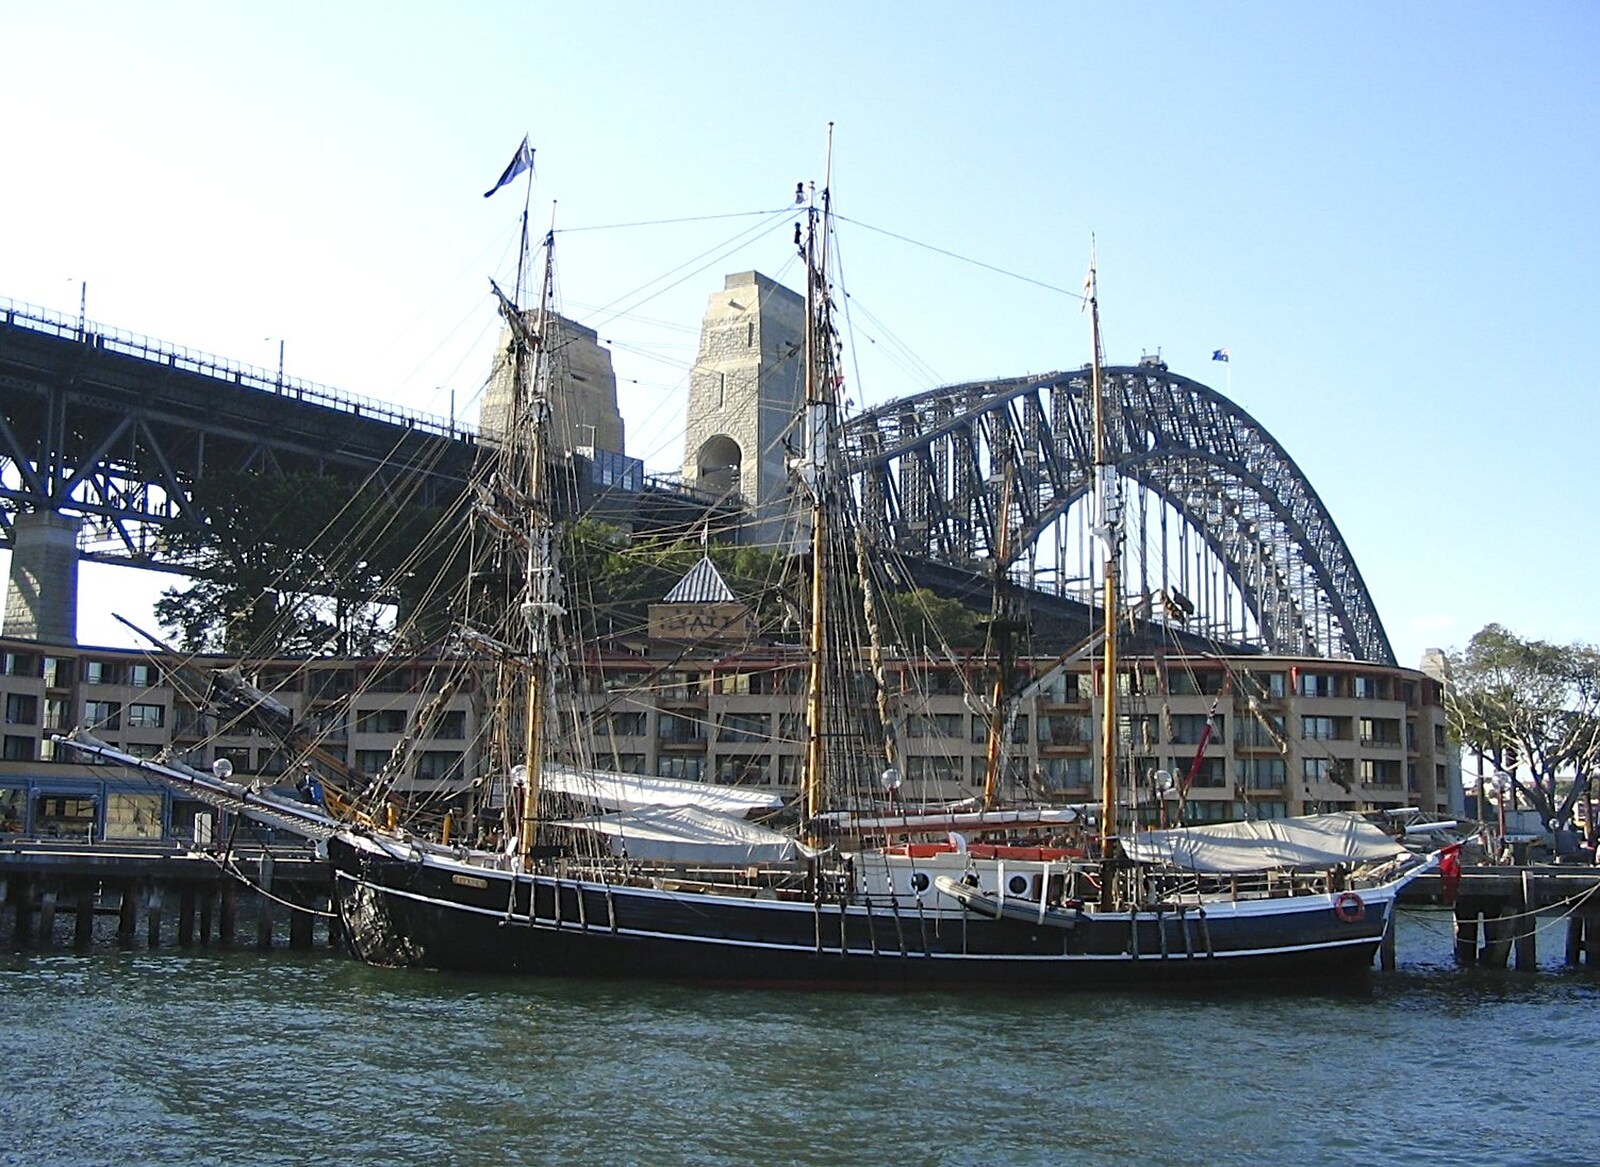 A tall ship by the Harbour Bridge from Sydney, New South Wales, Australia - 10th October 2004